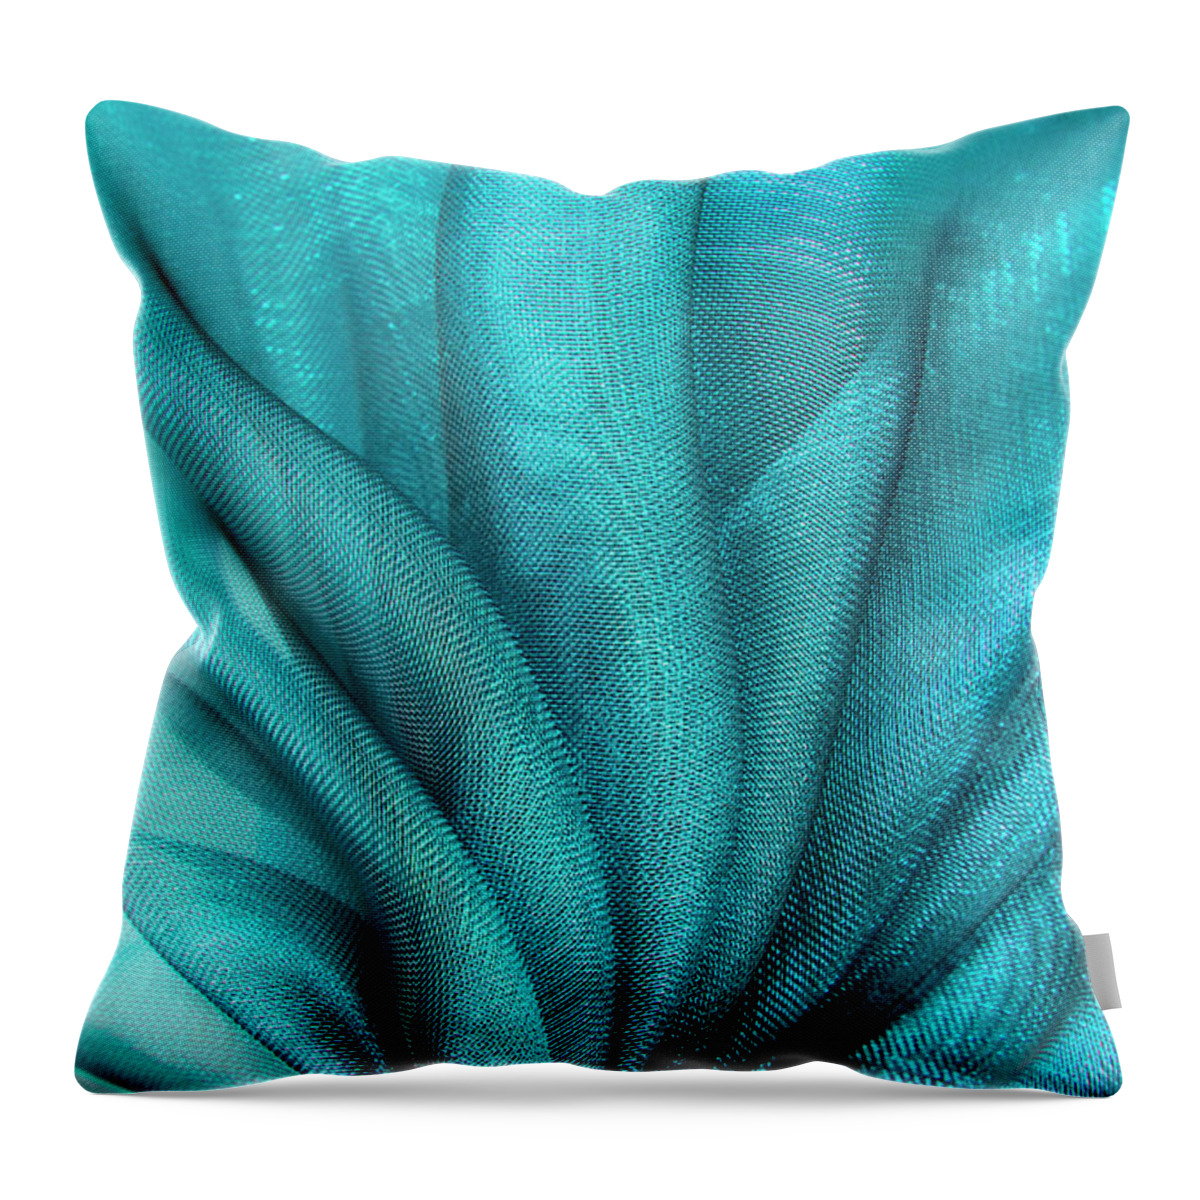 Organza Throw Pillow featuring the photograph Close Up Of The Blue Wavy Organza Fabric by Severija Kirilovaite